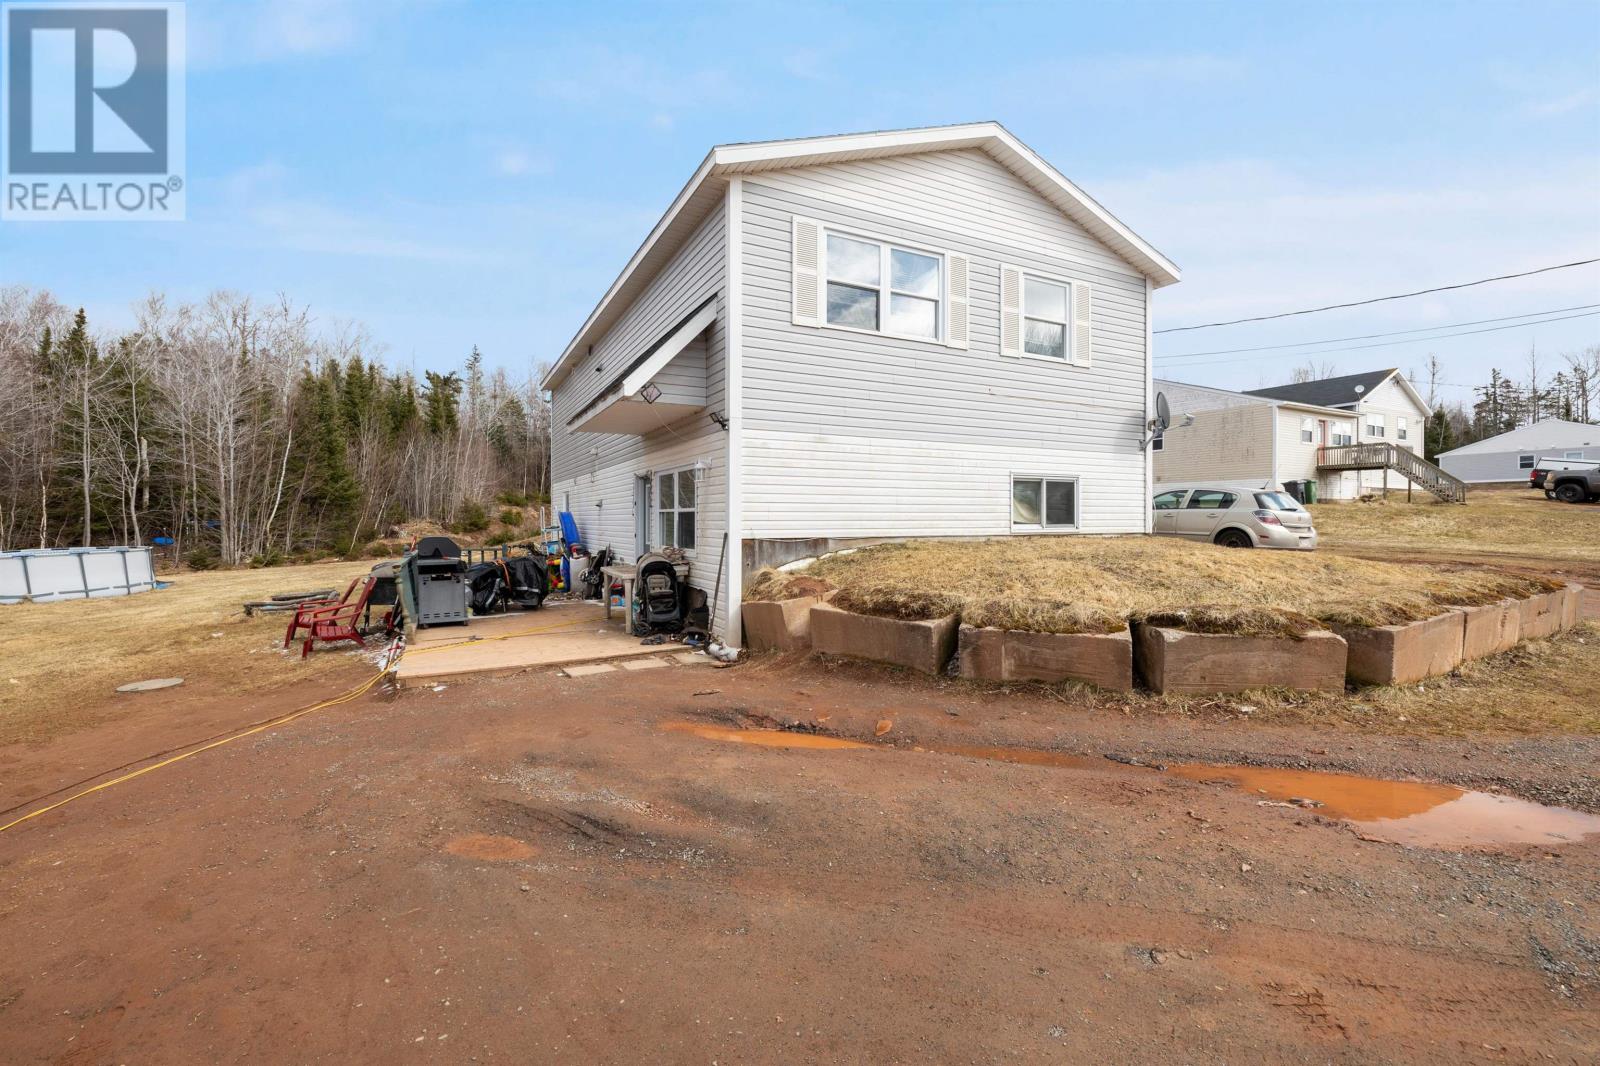 5819/5821 Campbell Road, Victoria Cross, Montague, Prince Edward Island  C0A 1R0 - Photo 15 - 202405682